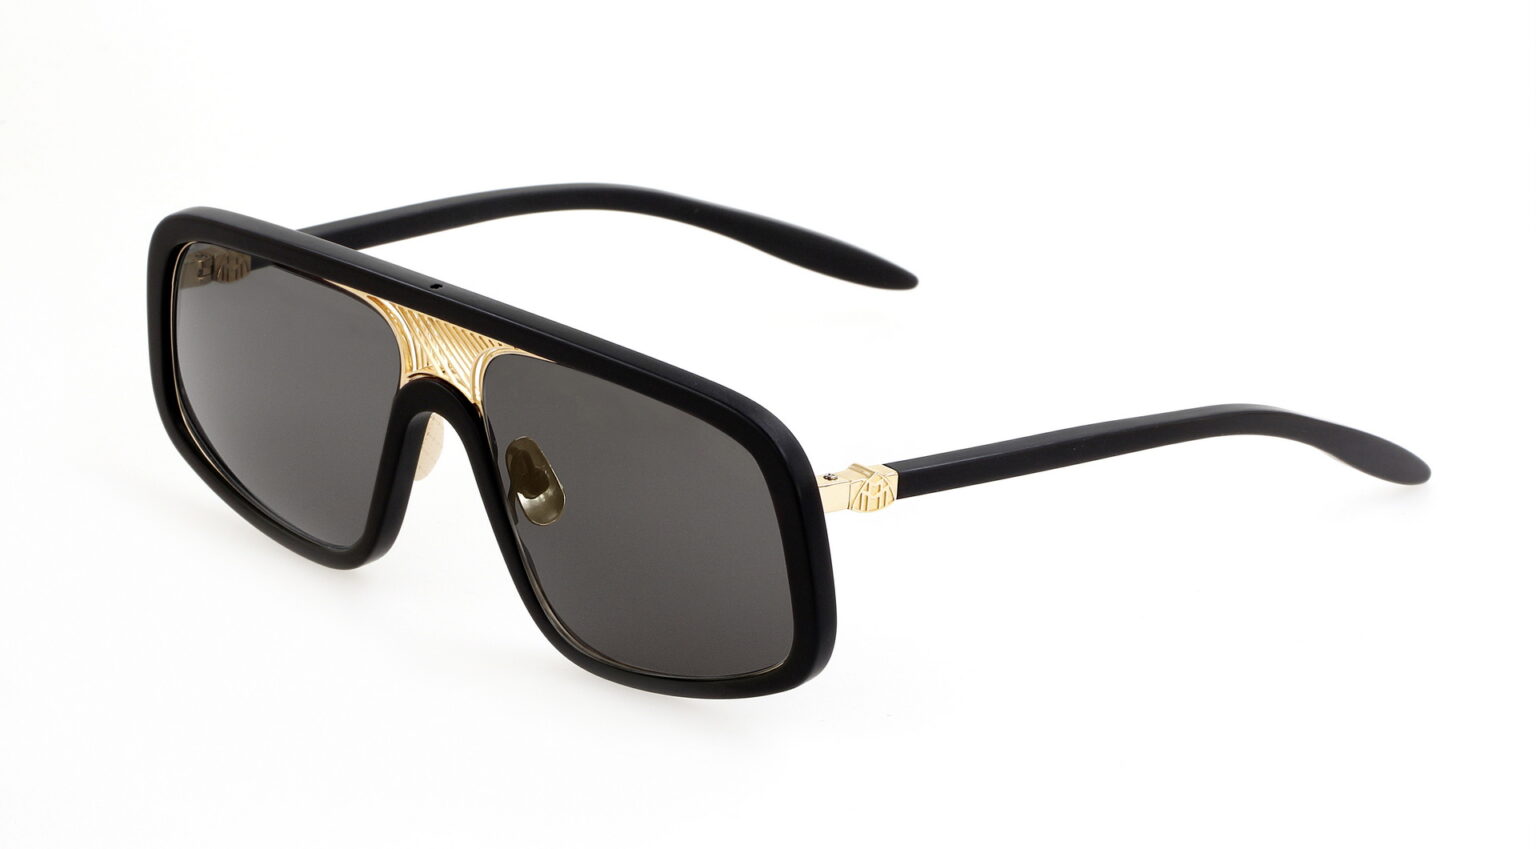 Maybach Designs Ultra Expensive Sunglasses Made Of Gold, Titanium, And ...